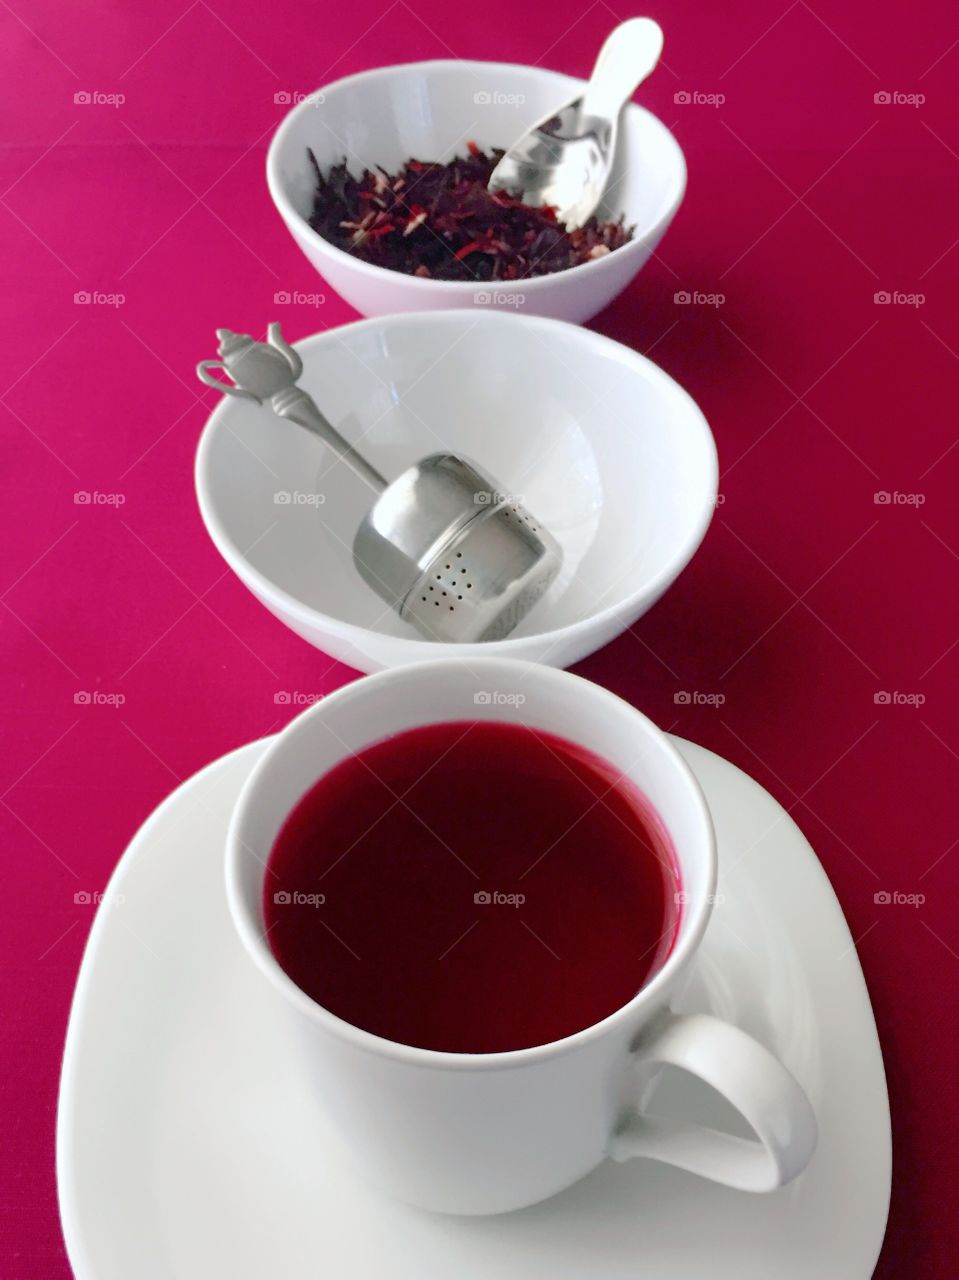 Tea Time - vertical arrangement of hibiscus tea in white cup, stainless steel teapot steeper in white bowl, dried hibiscus flowers in white bowl on magenta fabric background 